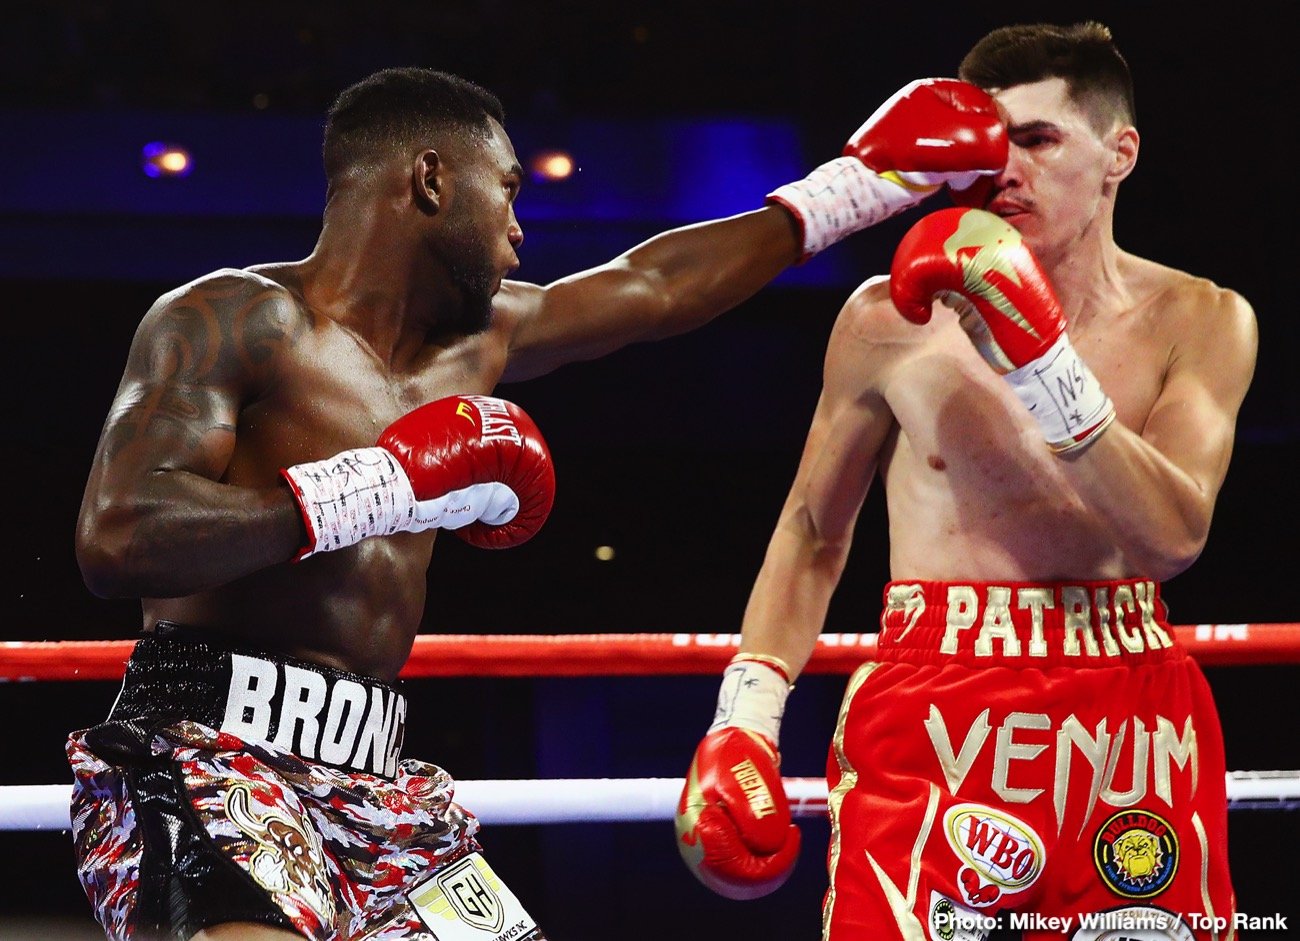 Image: Patrick Teixeira calls out Jermell Charlo - "I'll end his career"